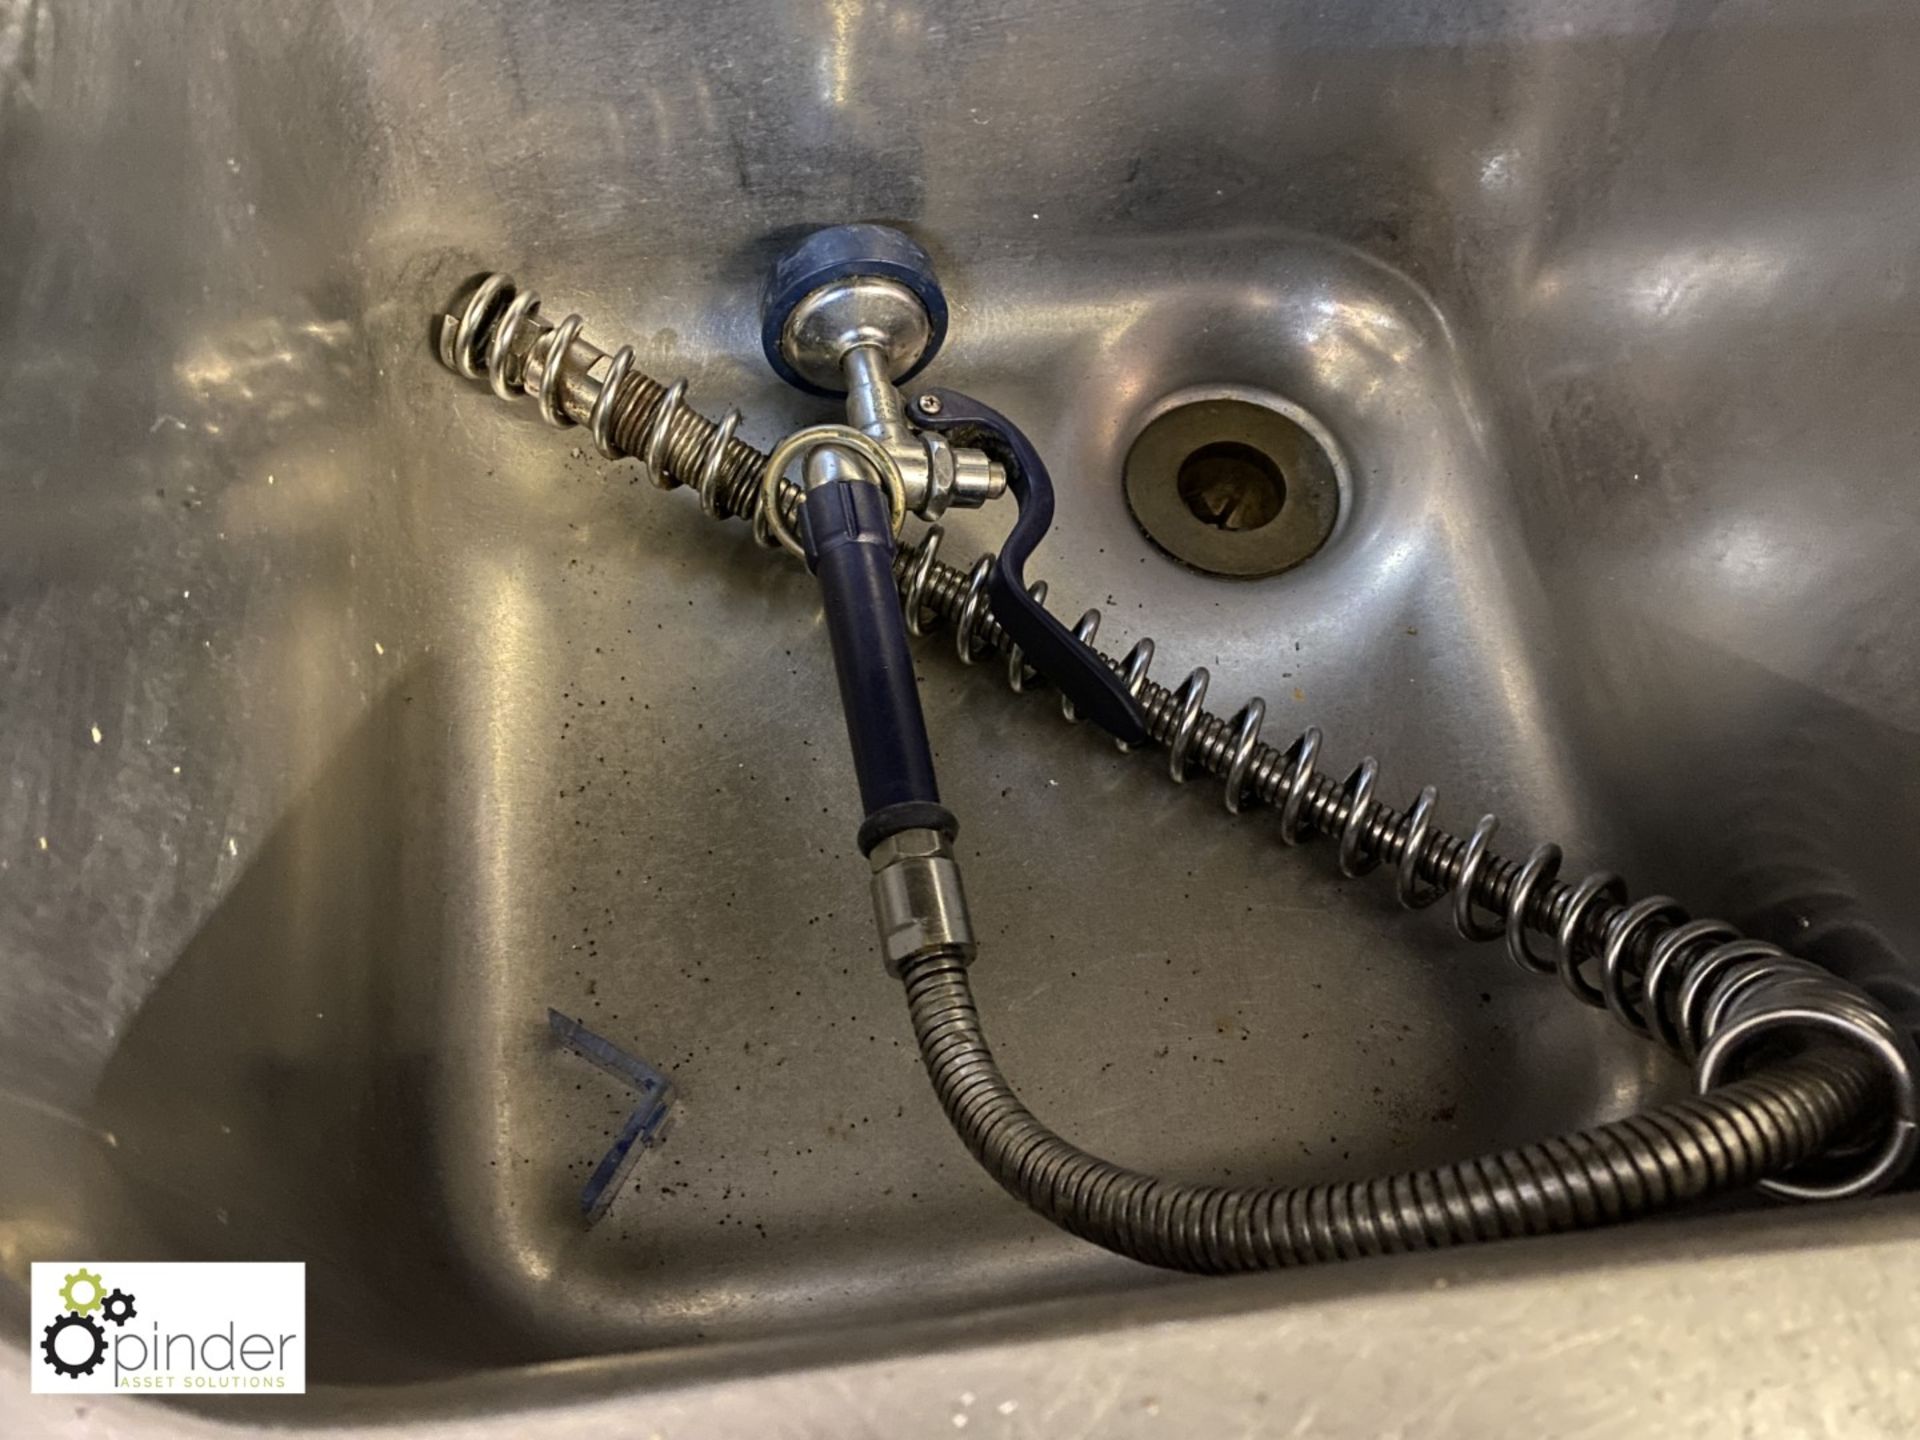 Stainless steel Sink, 1630mm x 700mm x 840mm, with tap and wash down gun - Image 3 of 3